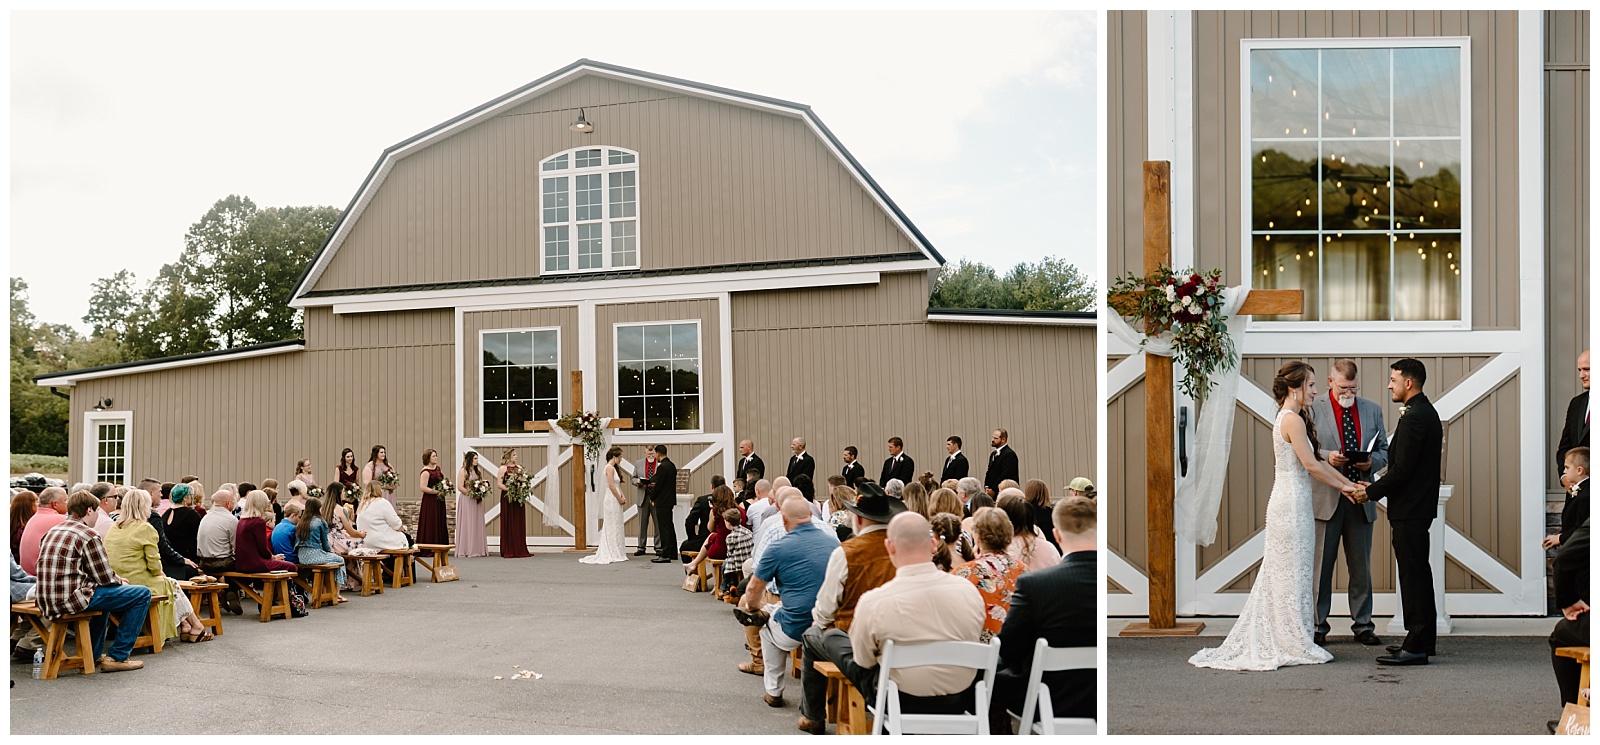 A wide image showing the full ceremony area at the Farm at Oak Hill, a rustic wedding venue in Mockville, NC.